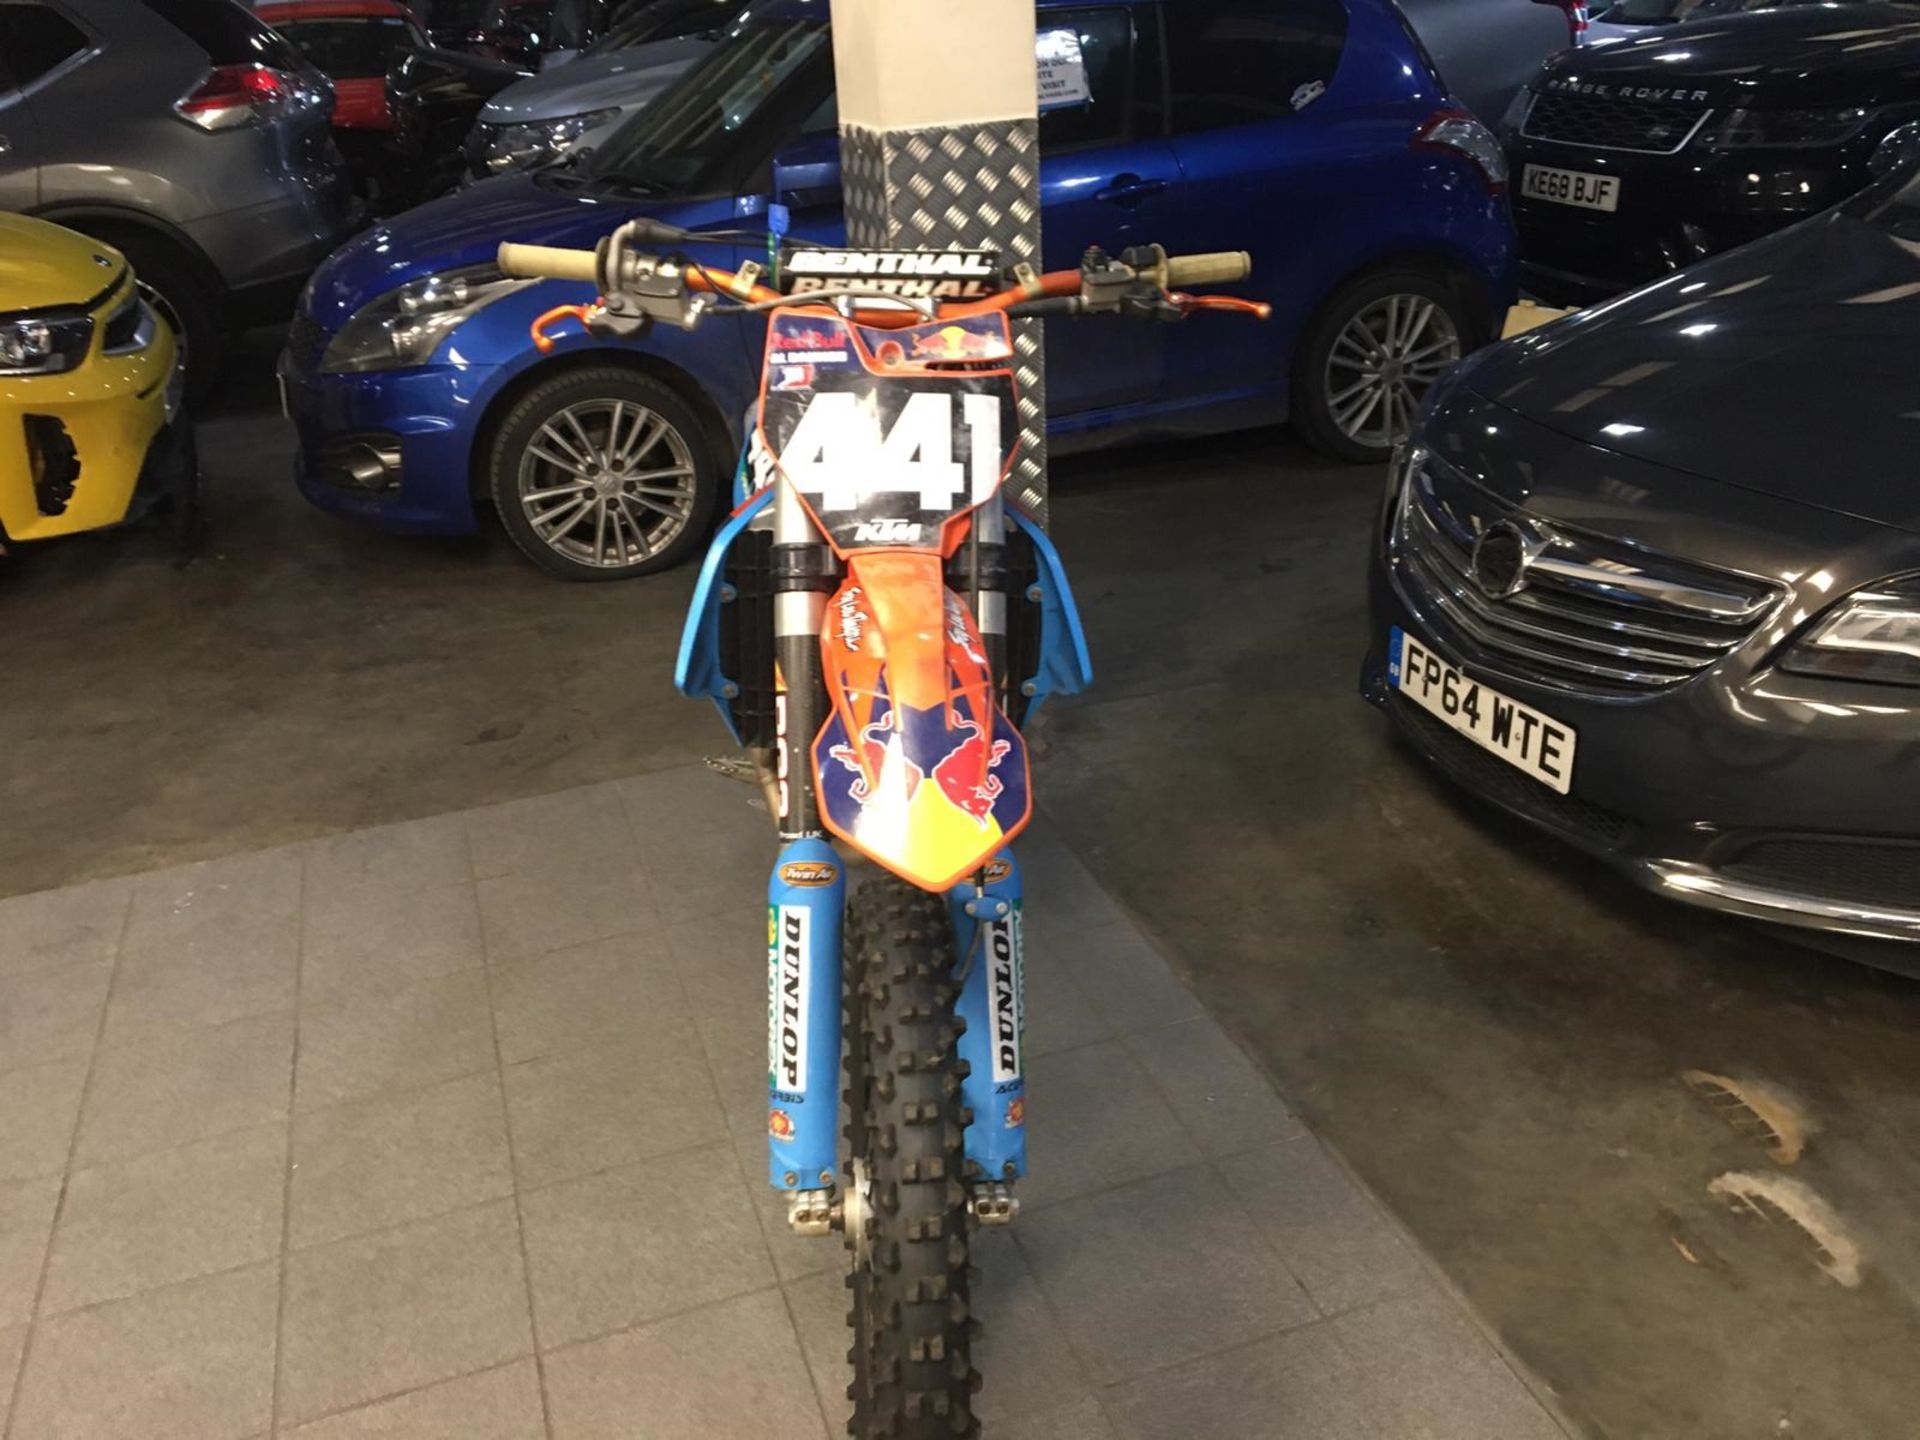 2018 KTM 250 MOTORCROSS BIKE, IN PERFECT WORKING ORDER, STARTS AND DRIVES, ELECTRIC STARTS *NO VAT* - Image 2 of 5